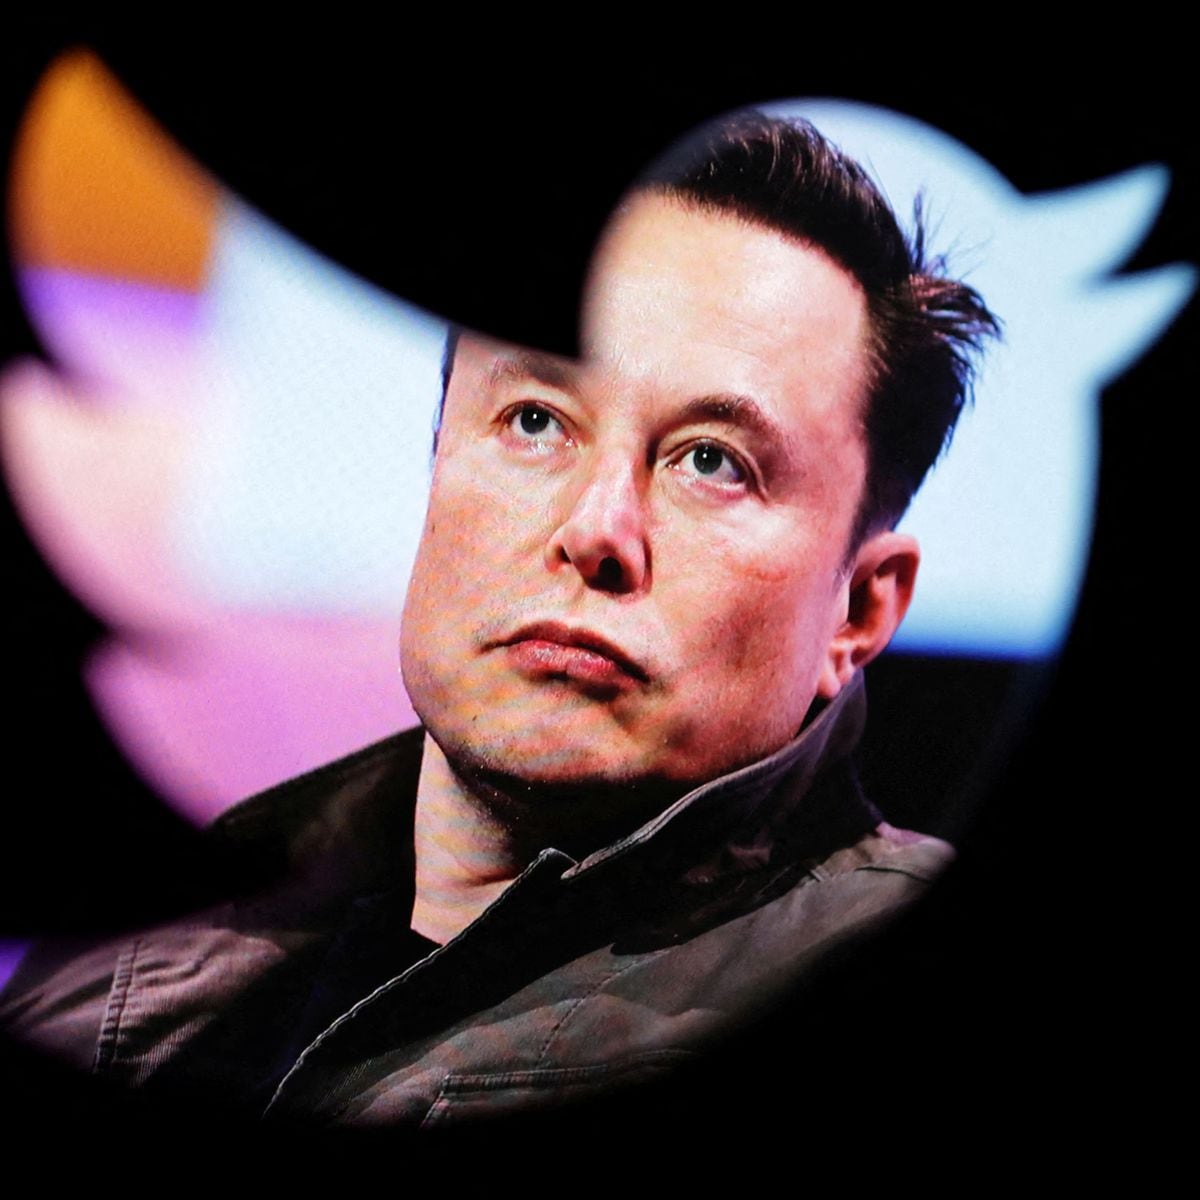 Elon Musk is no longer the richest man on the planet, according to Forbes